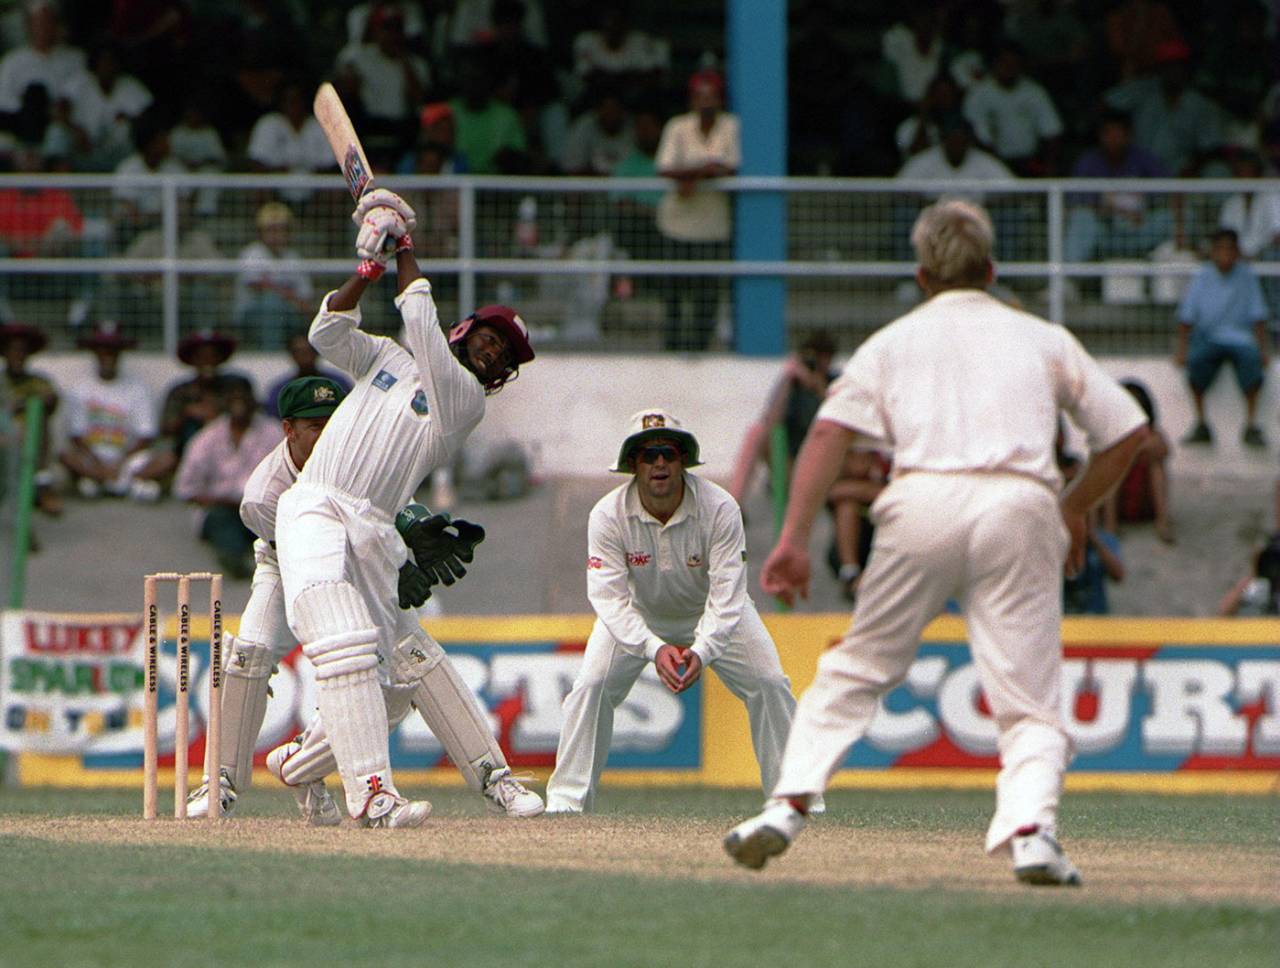 Brian Lara is one of only two Test batsmen to achieve a HSI value of 1.5 or more in both innings of a Test. The other one was Geoff Rabone of New Zealand&nbsp;&nbsp;&bull;&nbsp;&nbsp;Getty Images